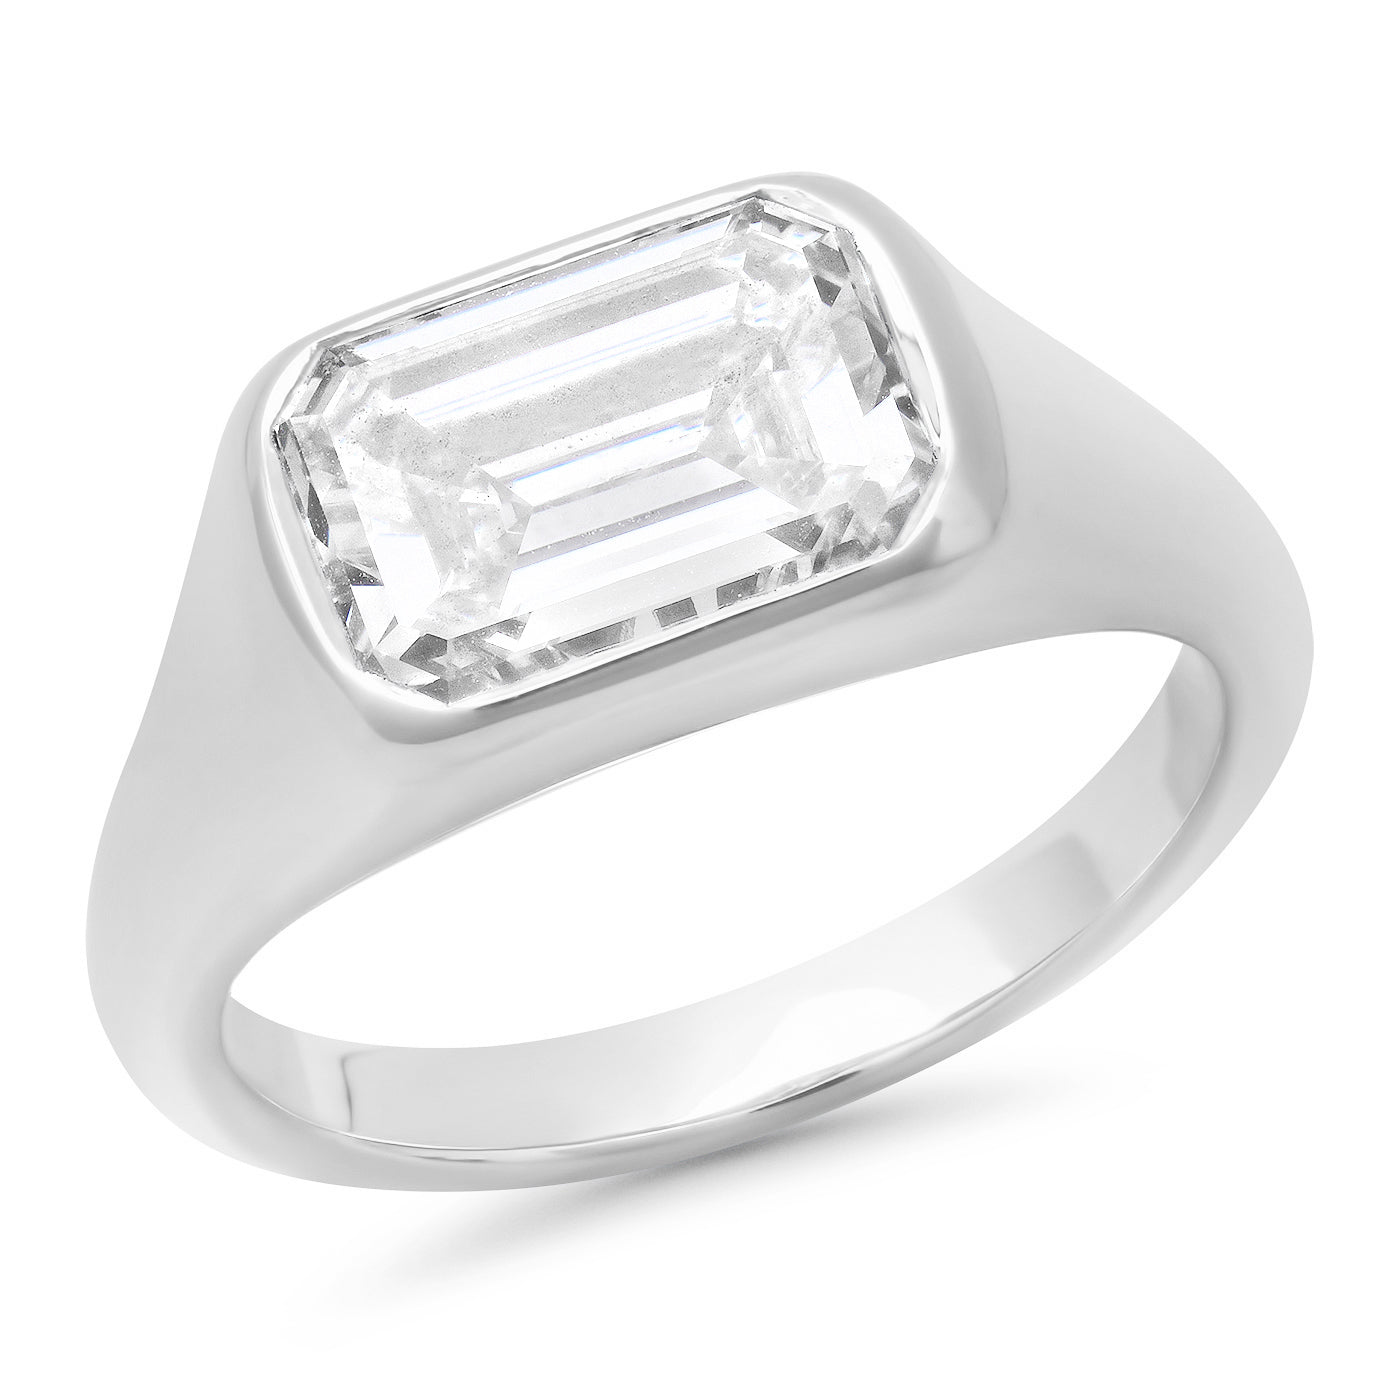 Sold - 2.01ct Emerald Cut Engagement Ring